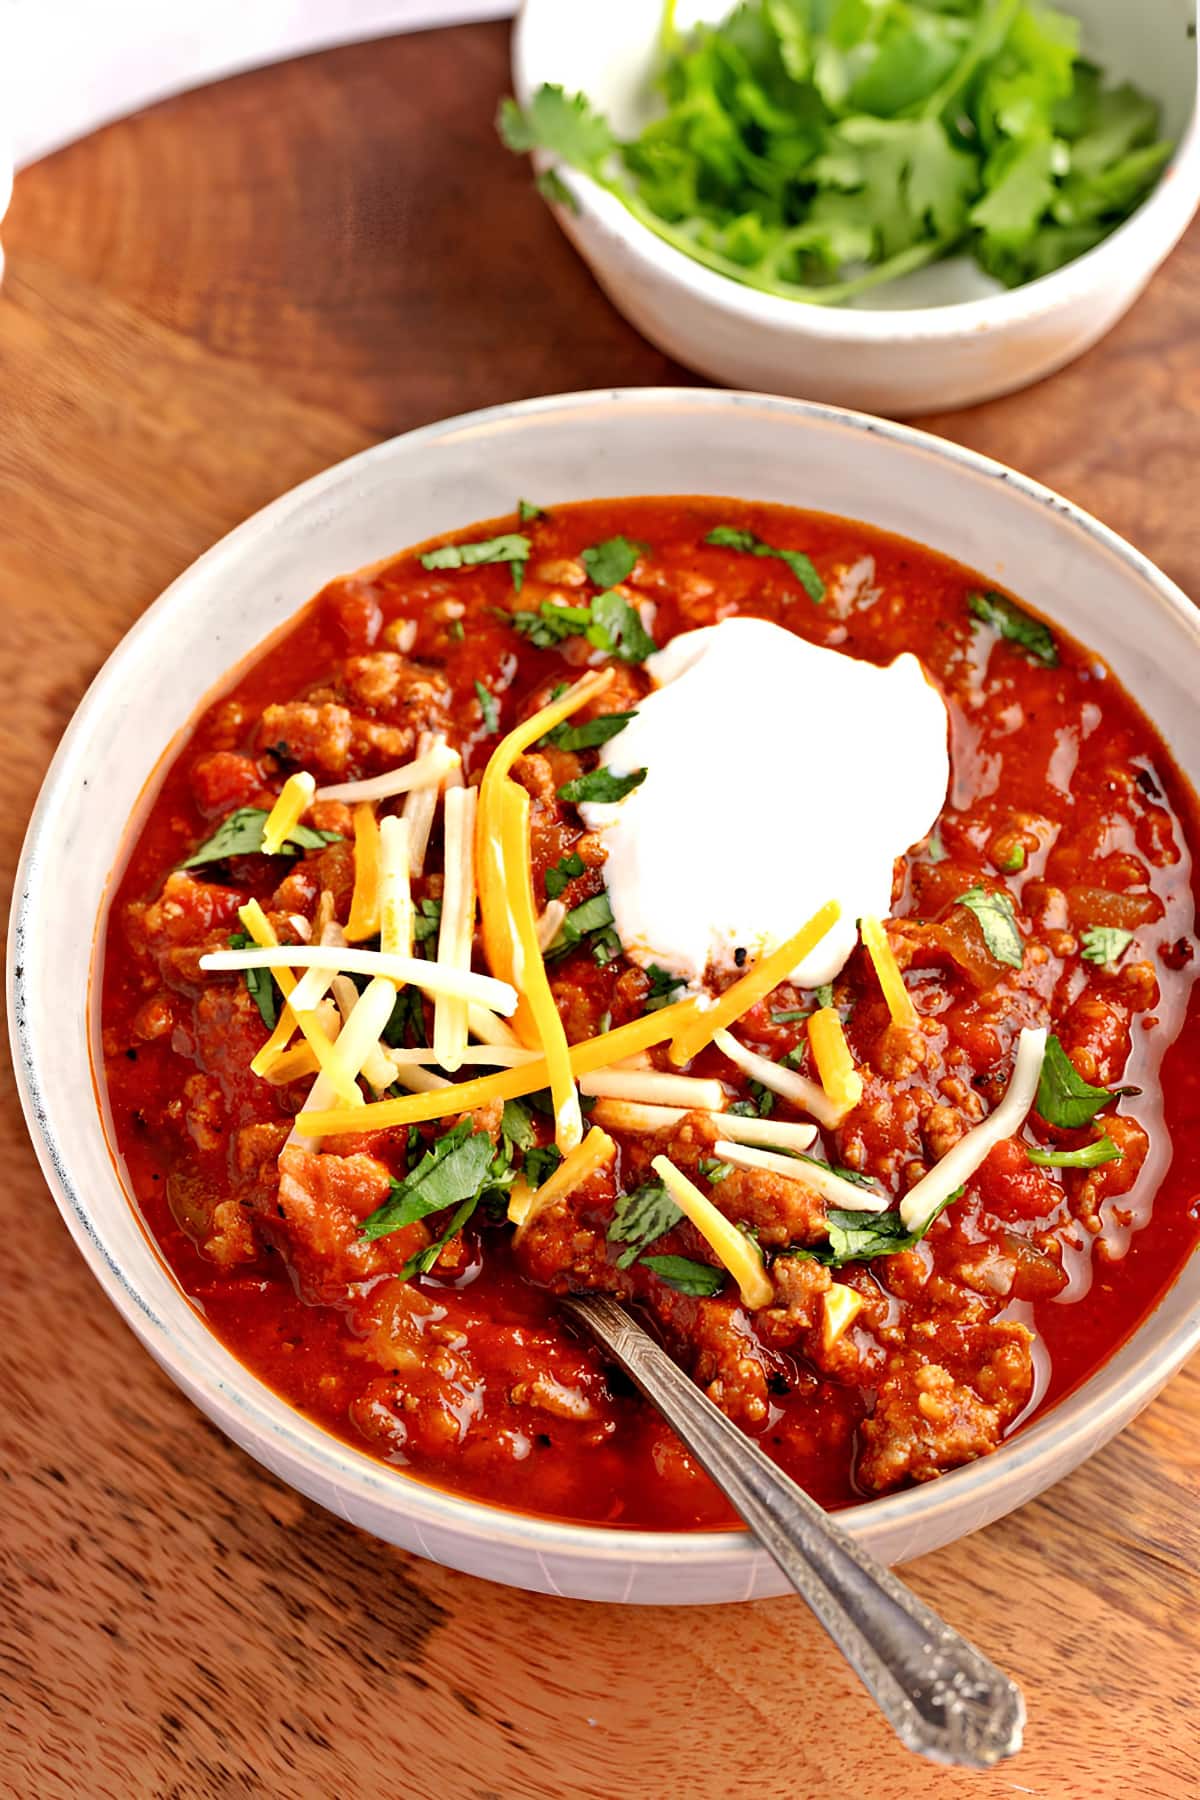 Bowl of Chipotle Chili Topped with Cilantro, Sour Cream and Cheese